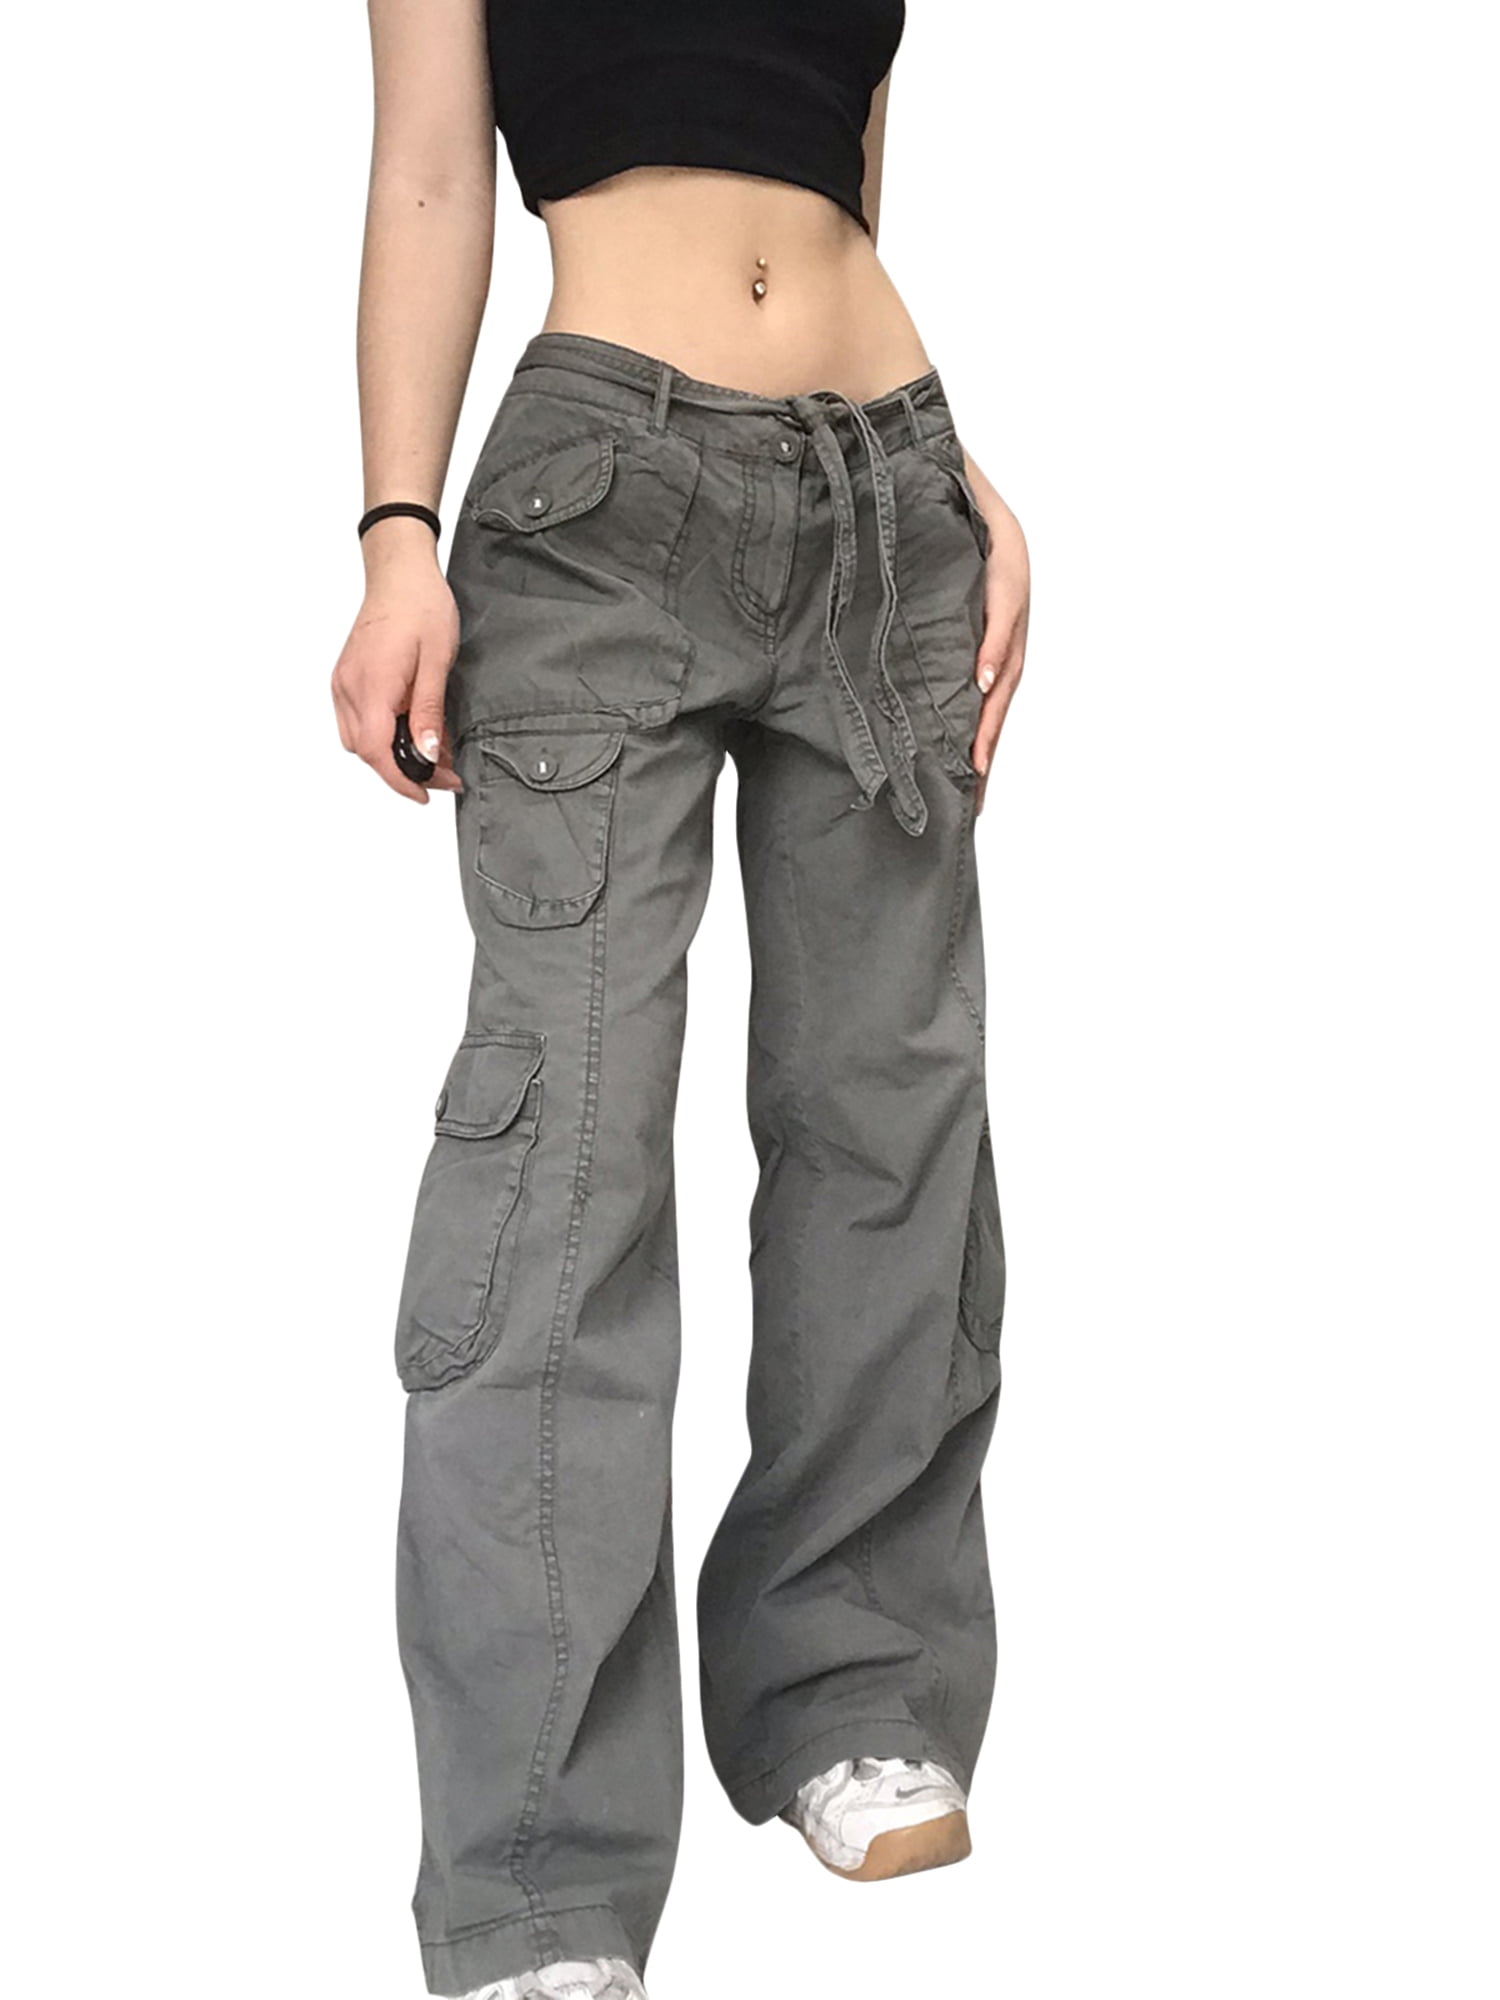 Vintage Baggy Cargo Pants For Women High Waist, Wide Leg, Pockets, Y2K  Denim Cargo Trousers Women With Pins Fashionable 90s Streetwear Style Style  #230603 From Dao02, $26.85